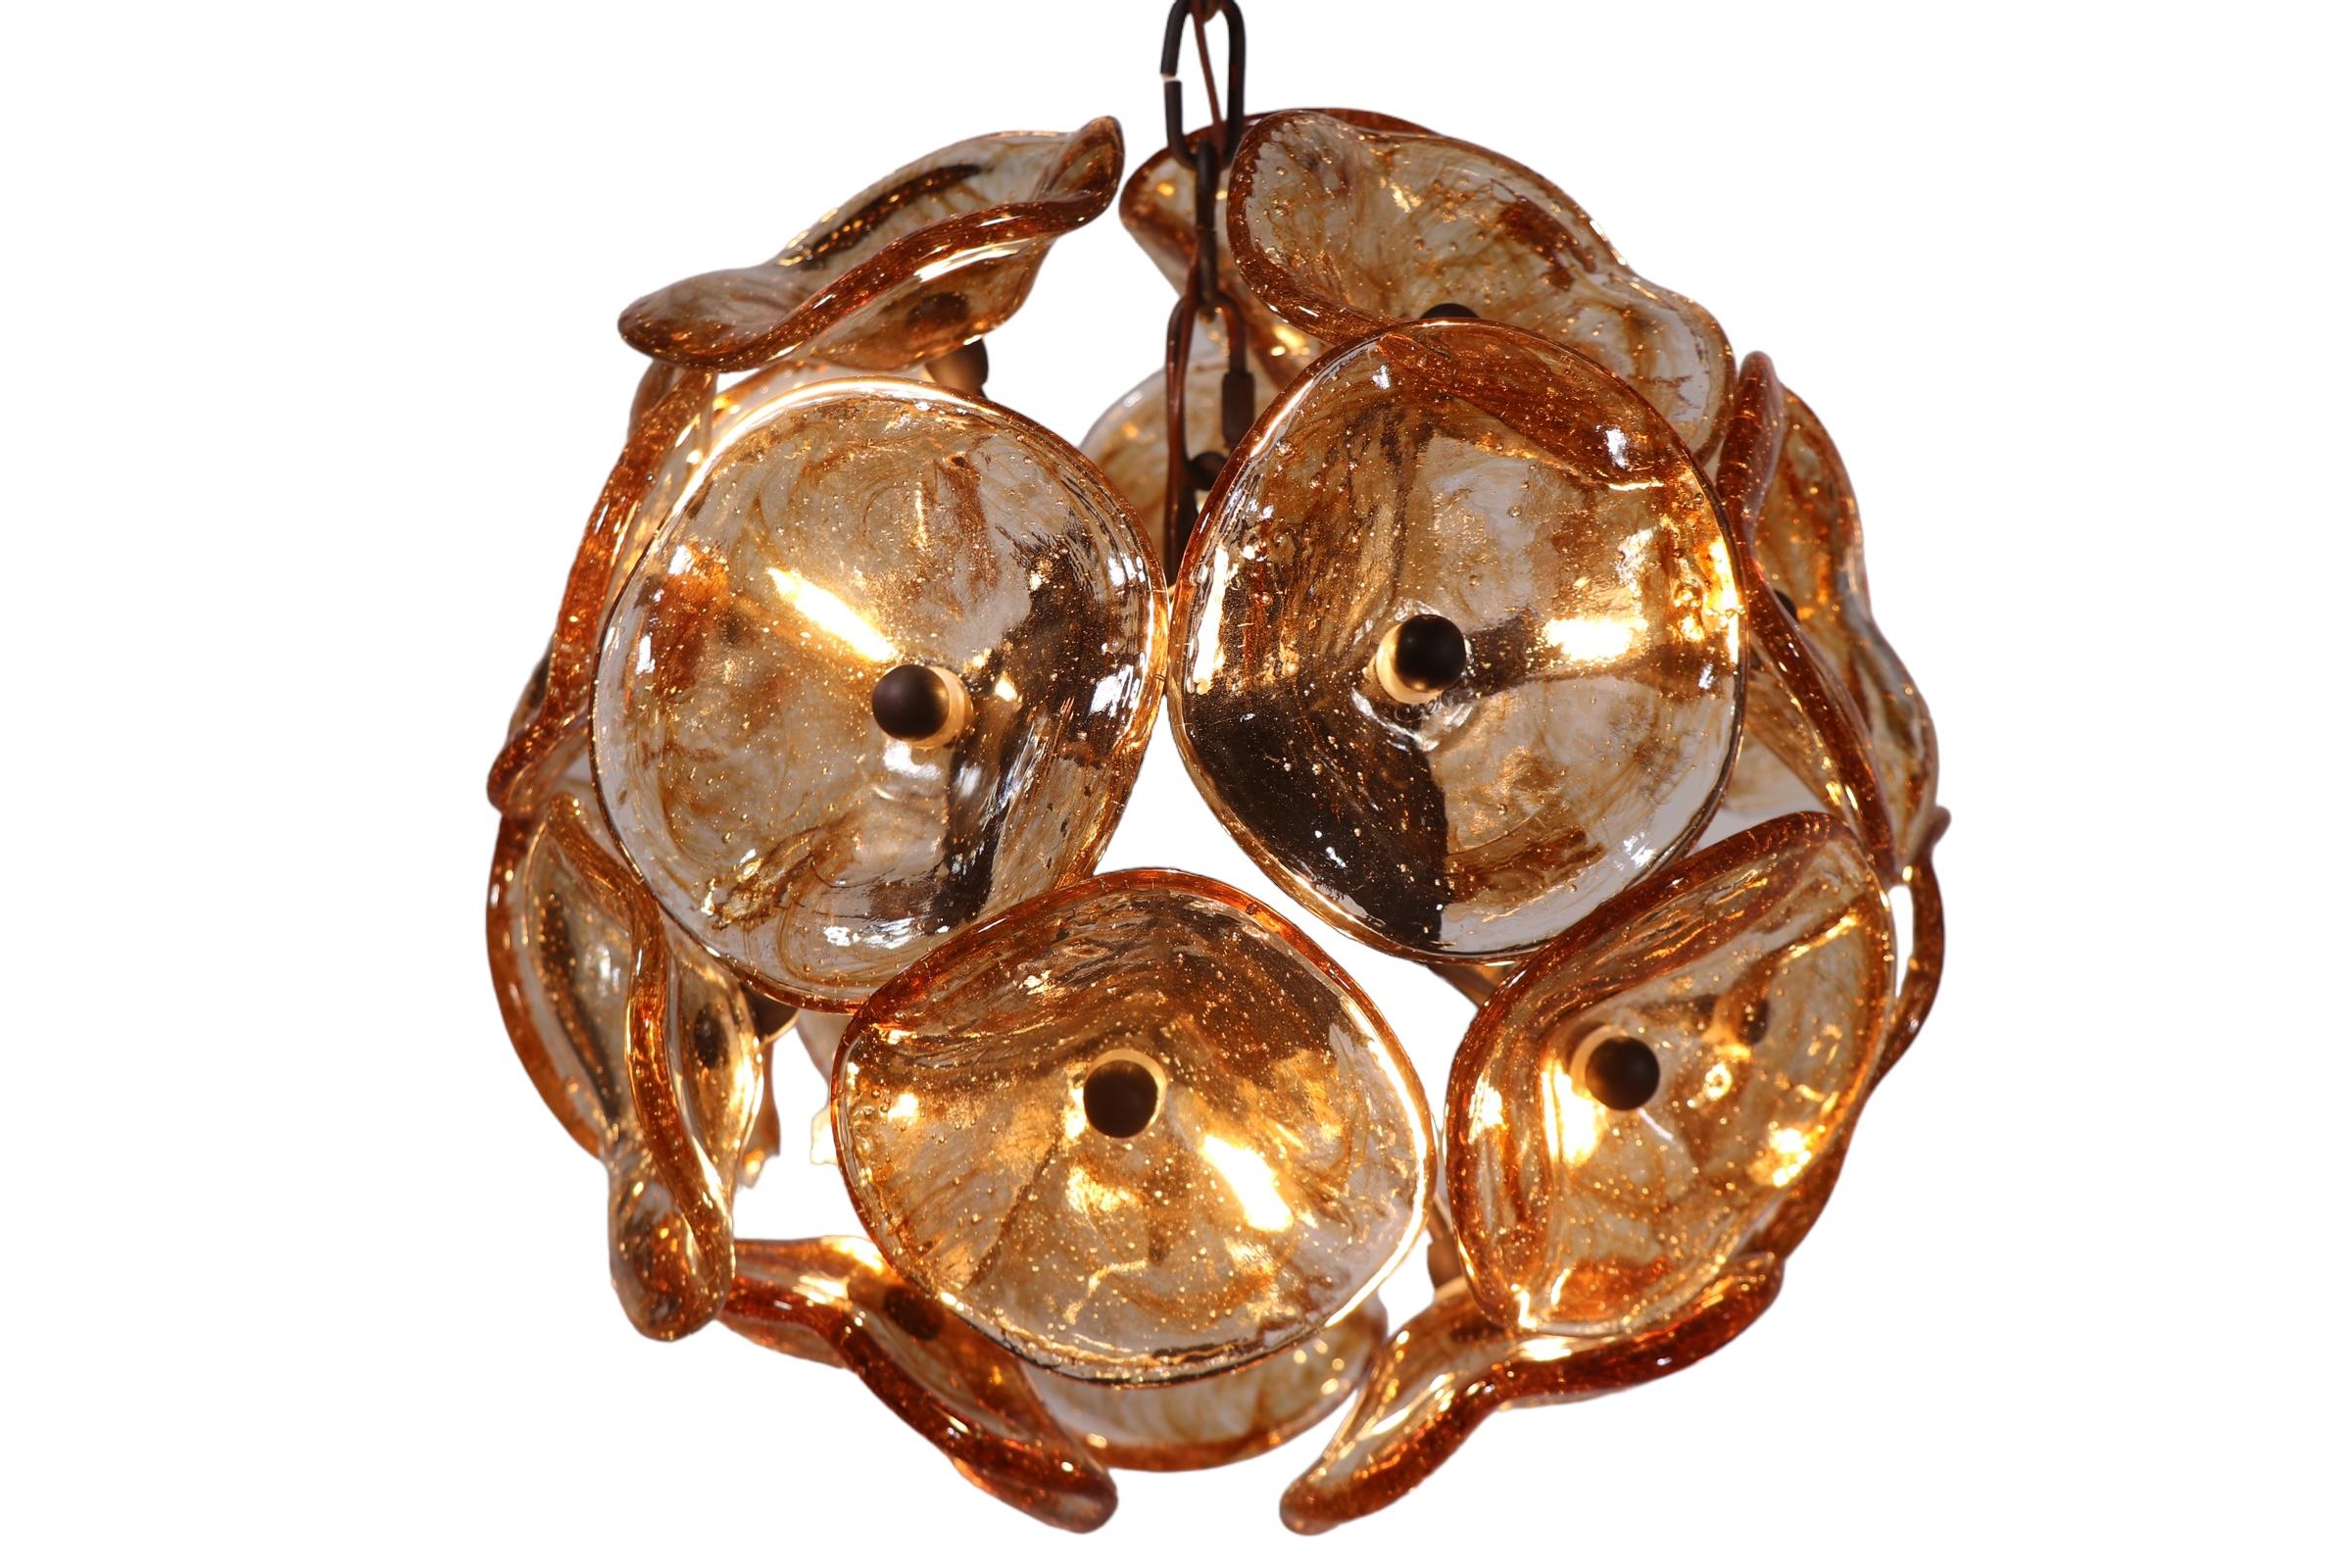 Post Modern Chandelier with Murano Glass Flowers by Fiori c 1990 -2010 For Sale 12